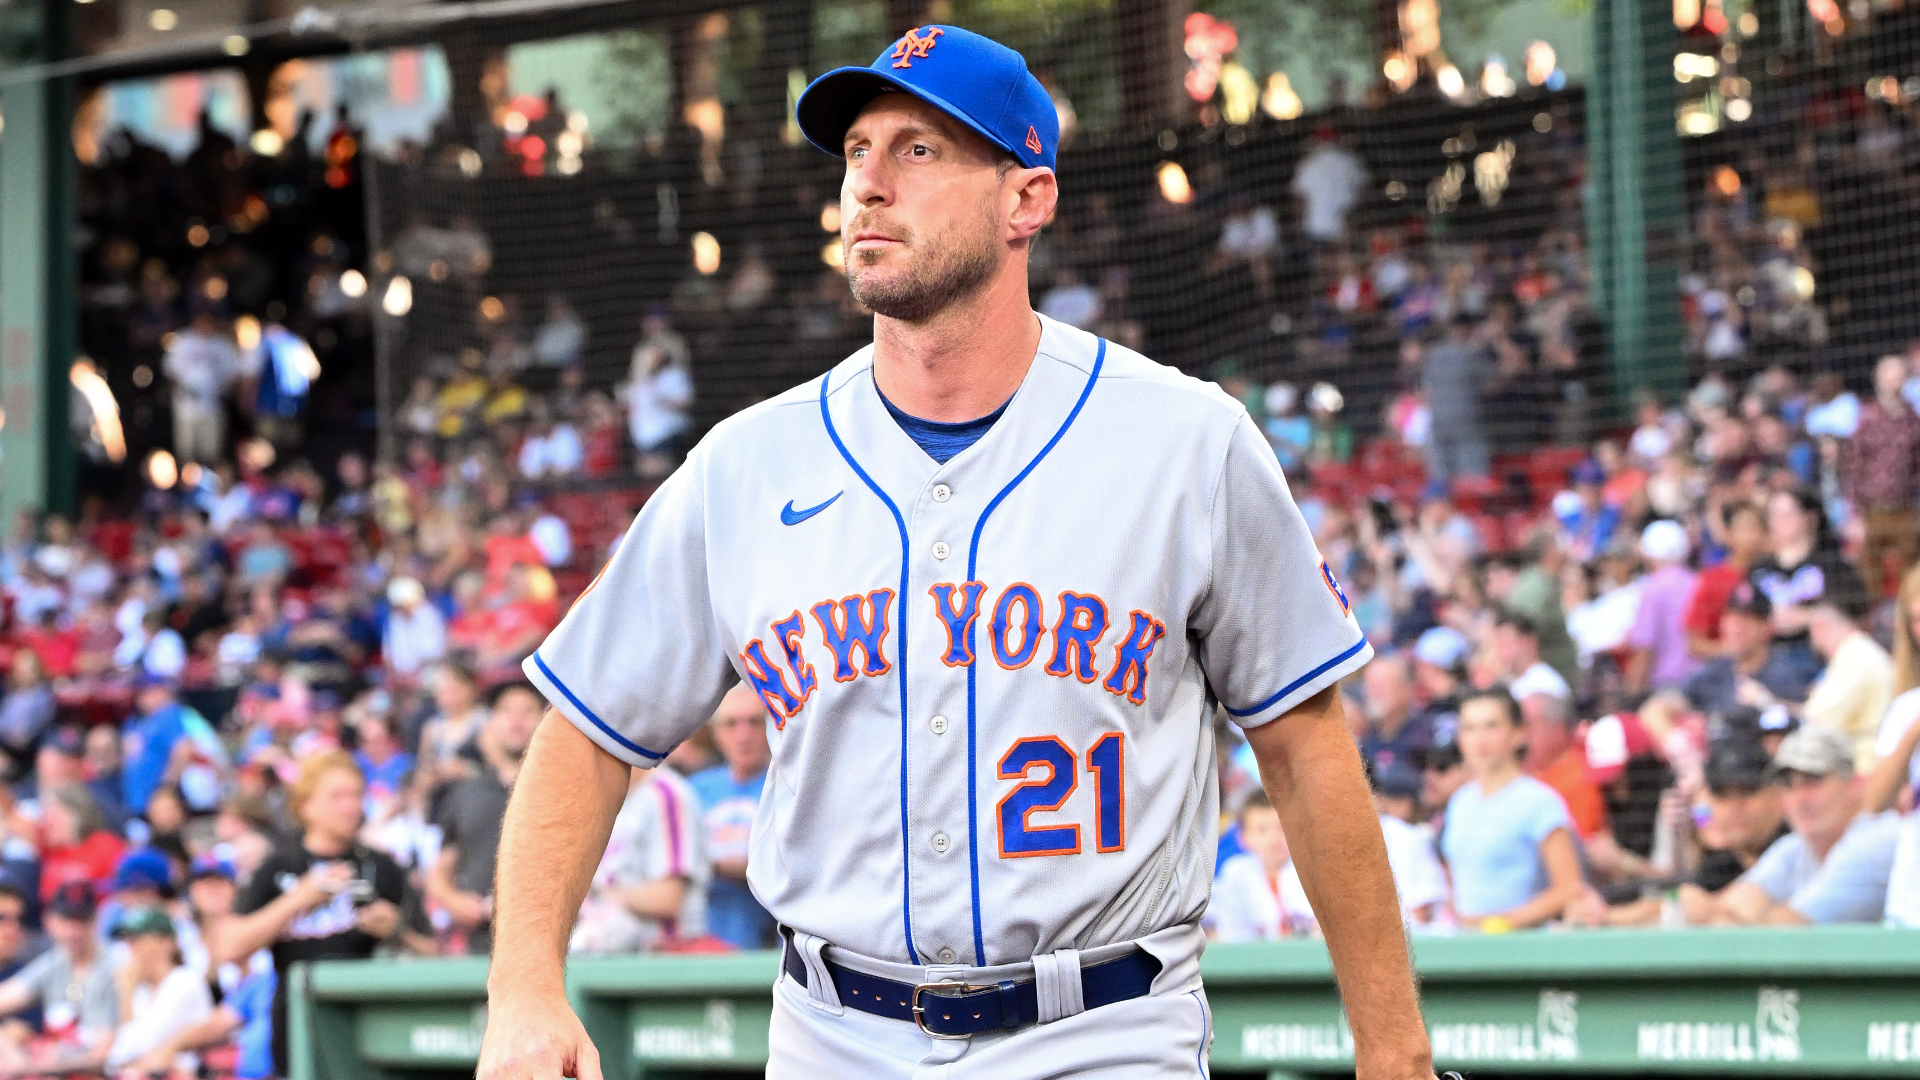 Mets star Max Scherzer sounds off on reuniting with Justin